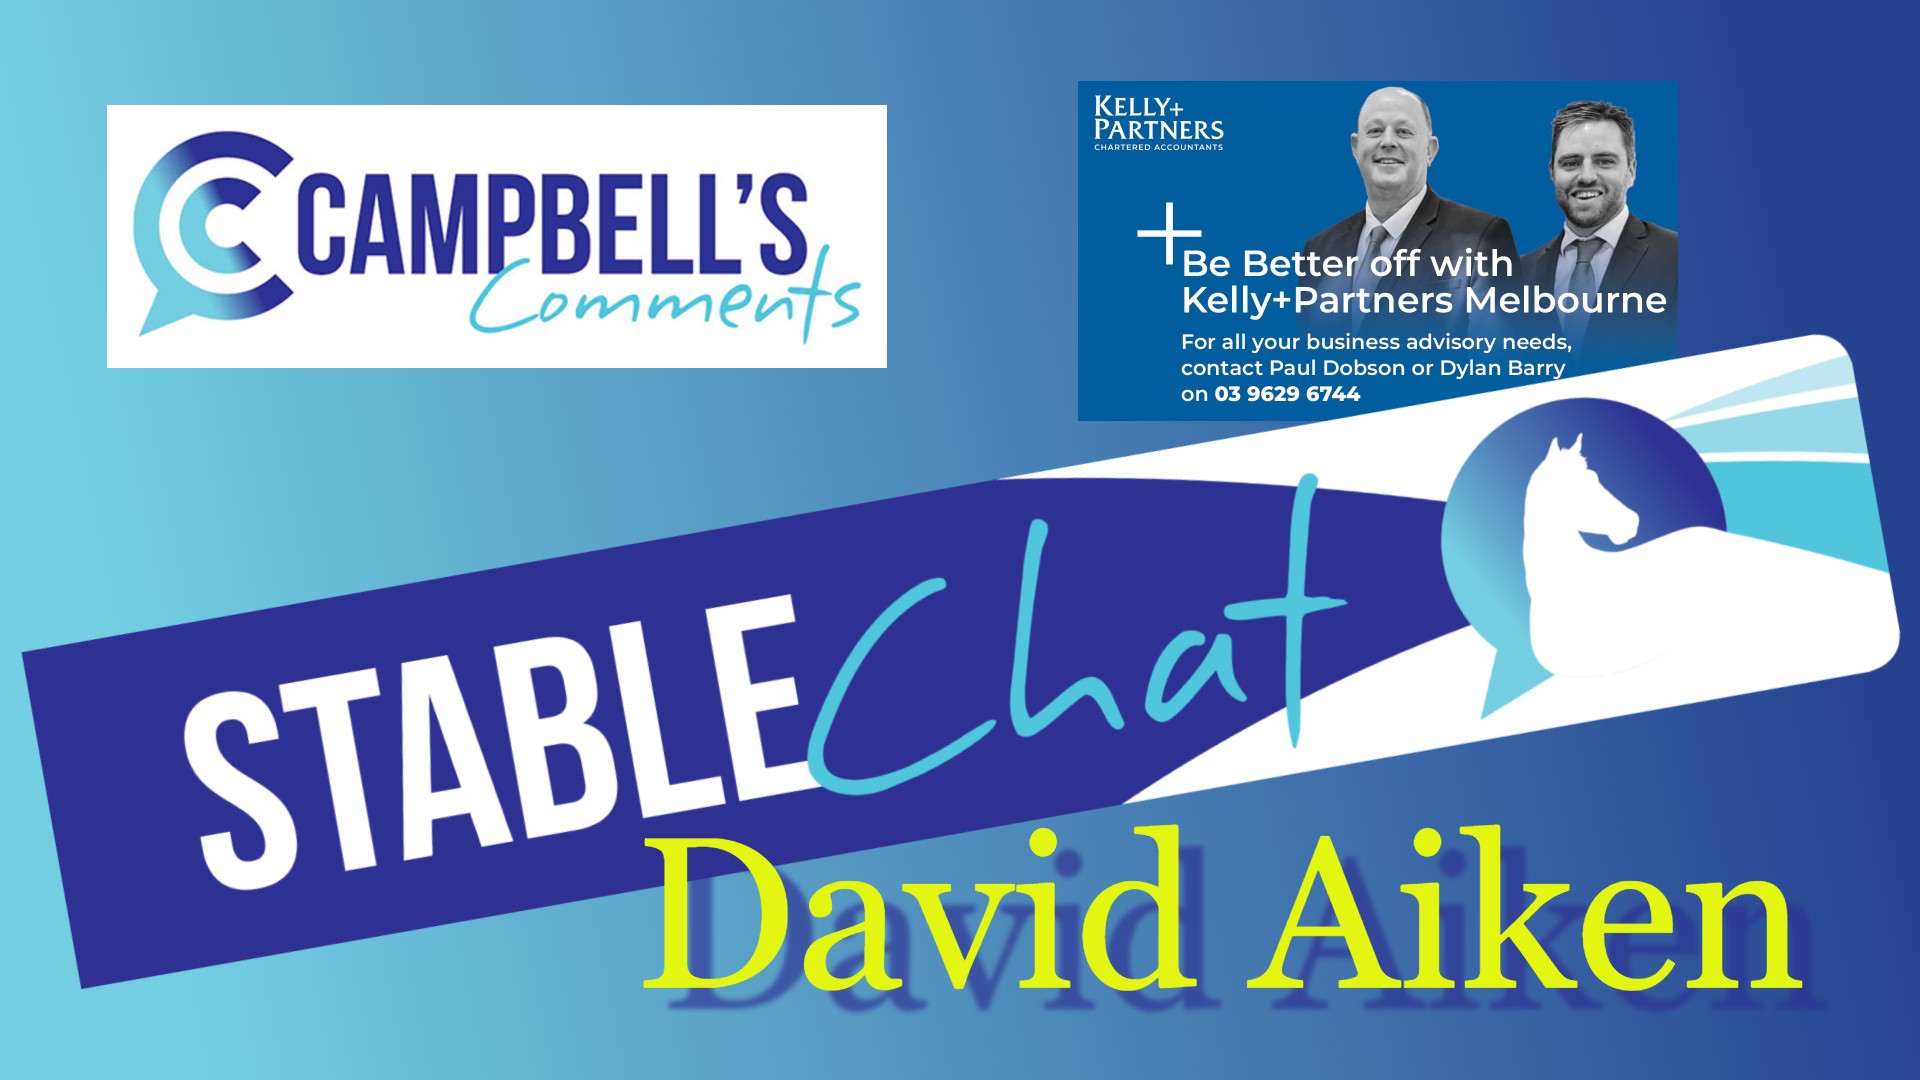 You are currently viewing 63: Stable Chat with David Aiken